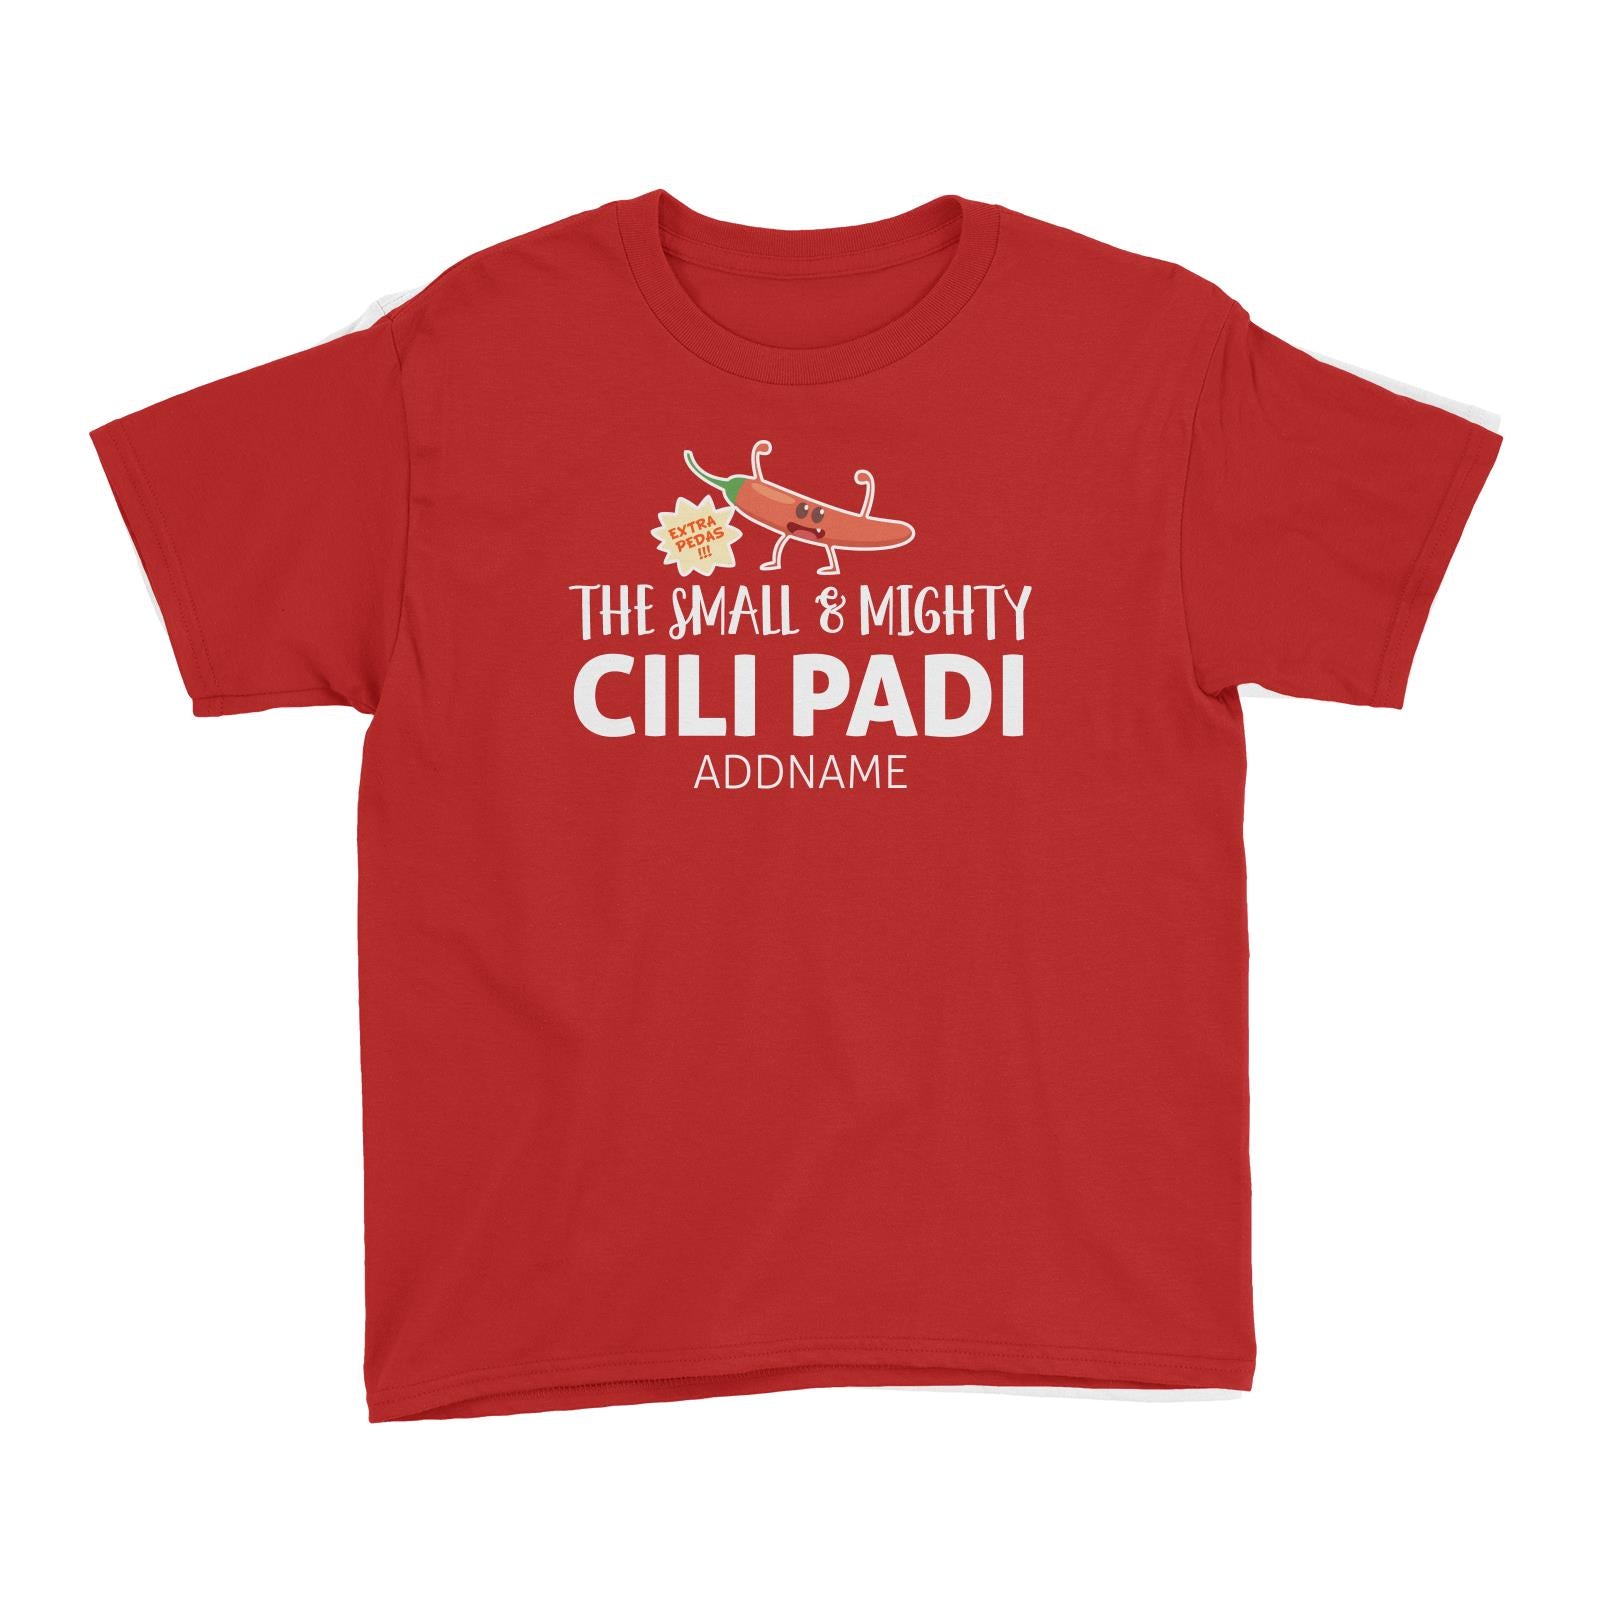 The Small and Mighty Cili Padi Extra Pedas Kid's T-Shirt